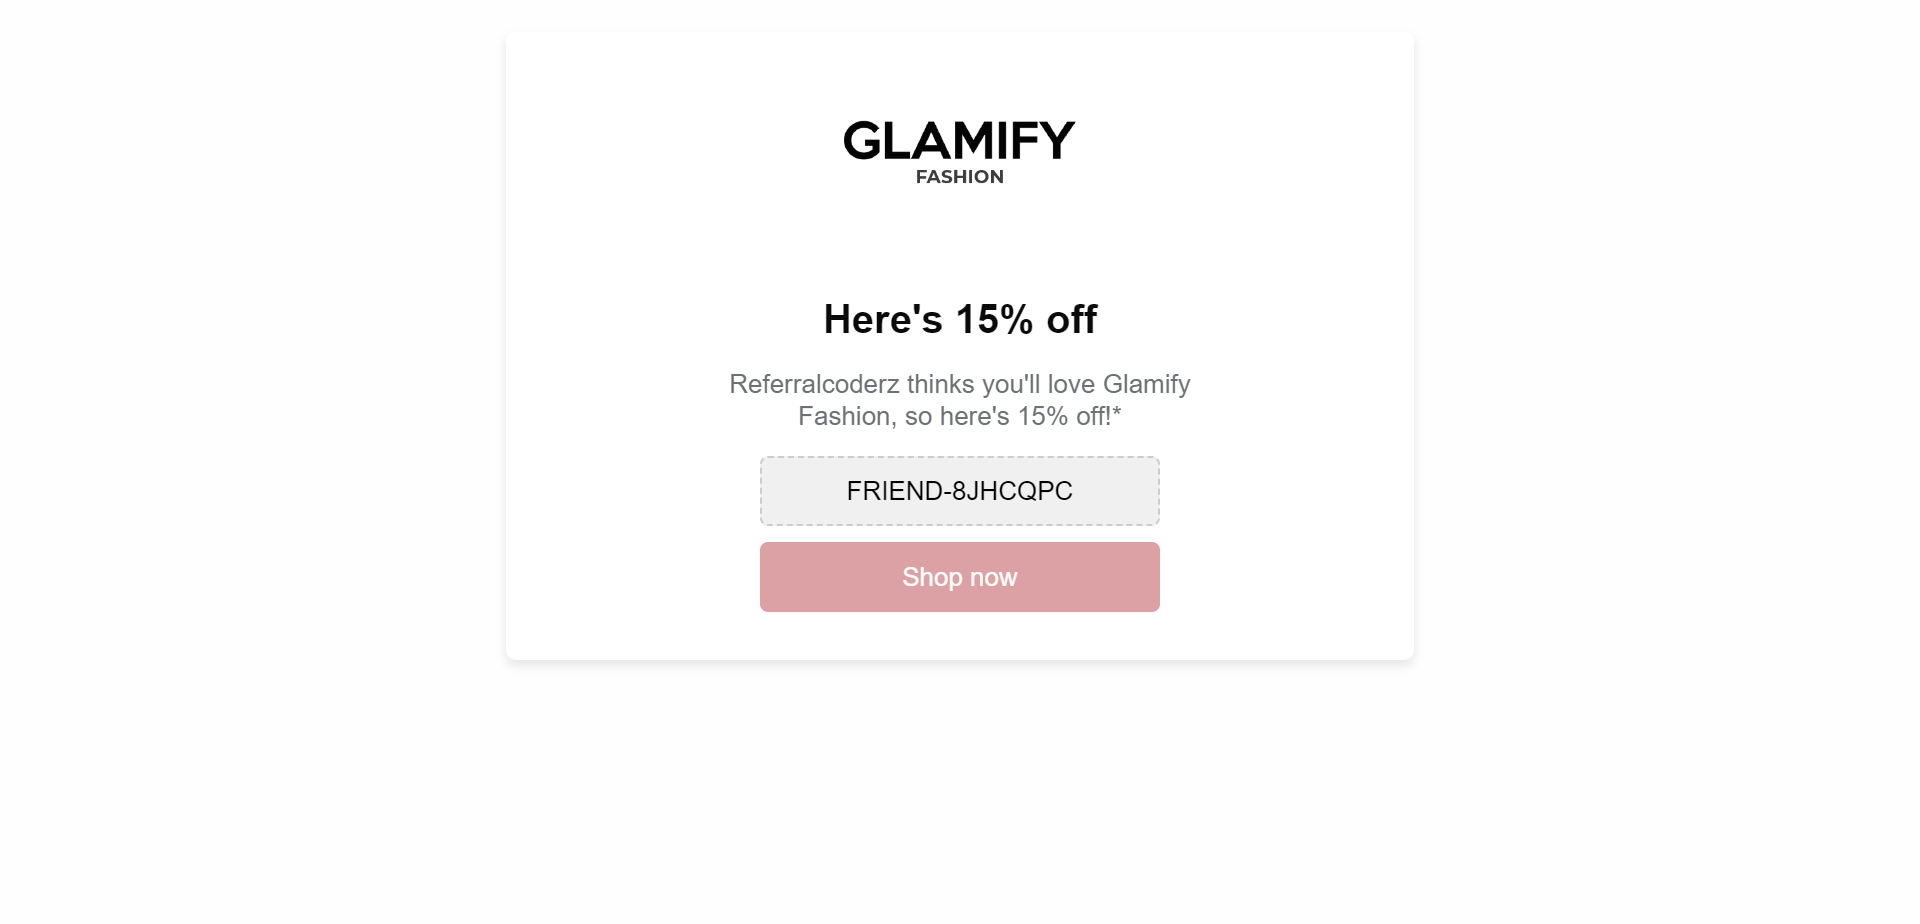 Landing Page for Glamify Fashion